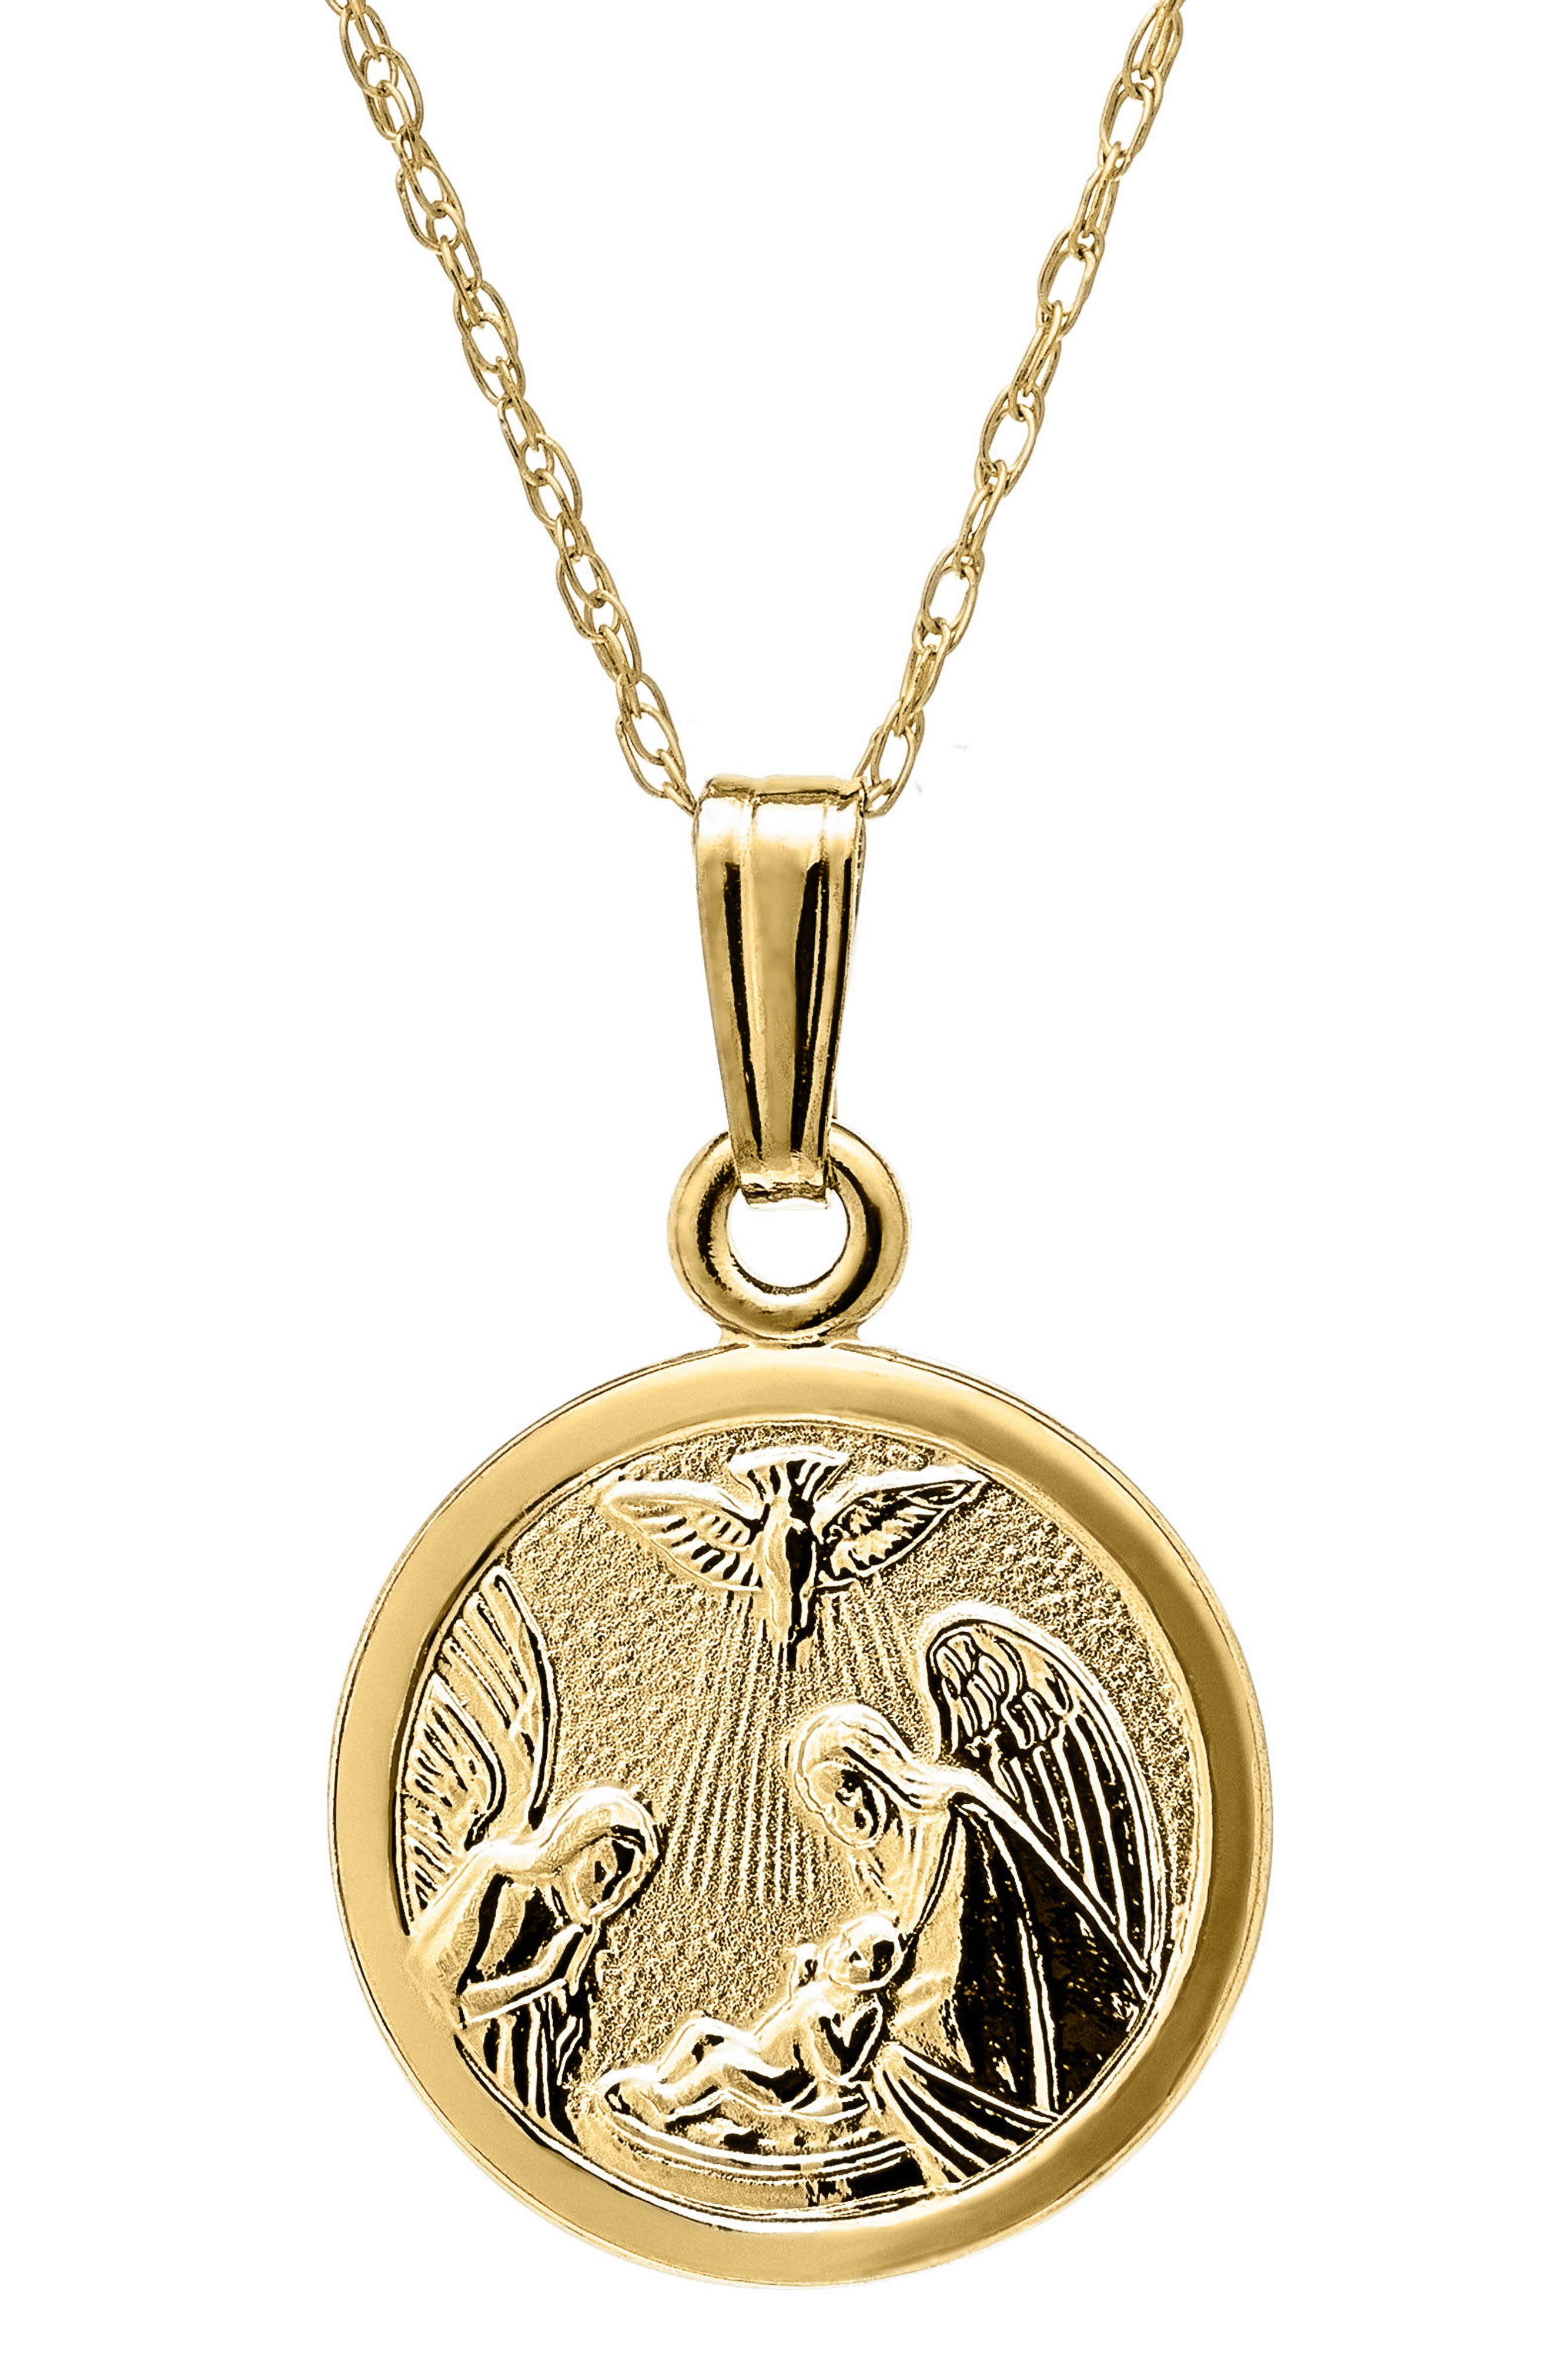 Guardian Round Necklace Charm 14K Solid Yellow Gold Baby Angel Medal Pendant 